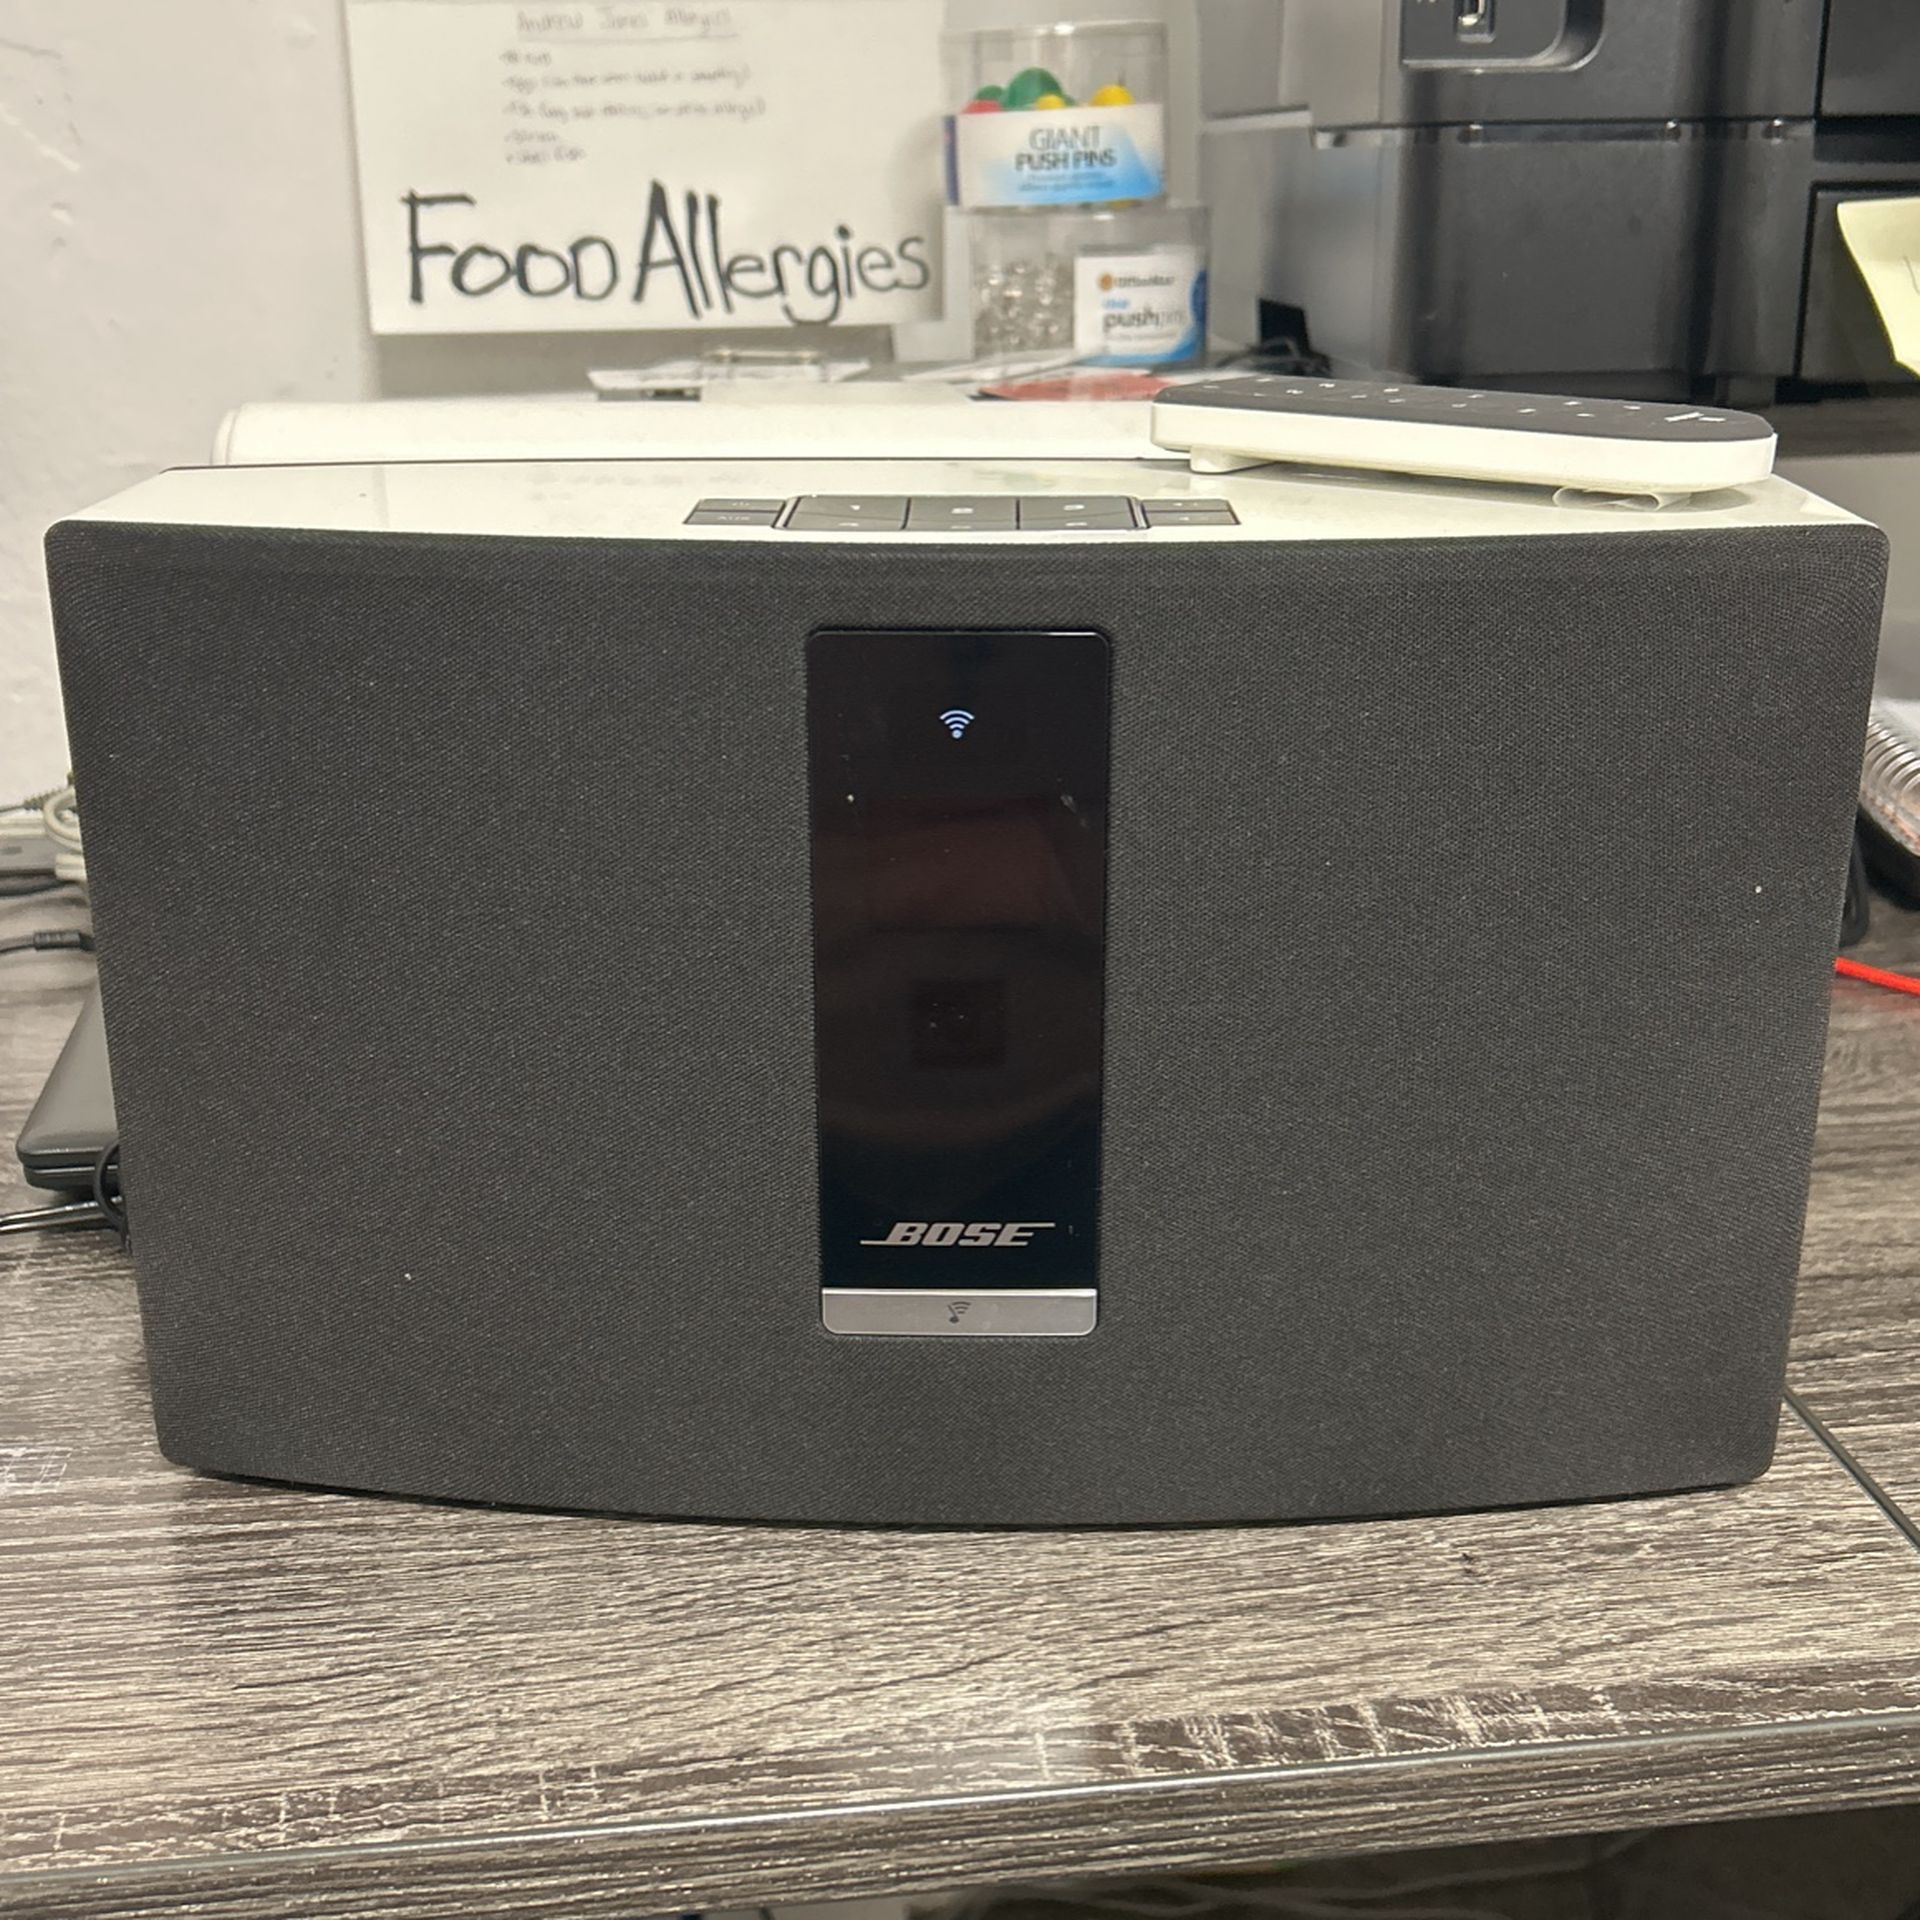 Bose SoundTouch 20 wifi and Bluetooth-Download Bose Sound Touch To Connect To WiFi & Use